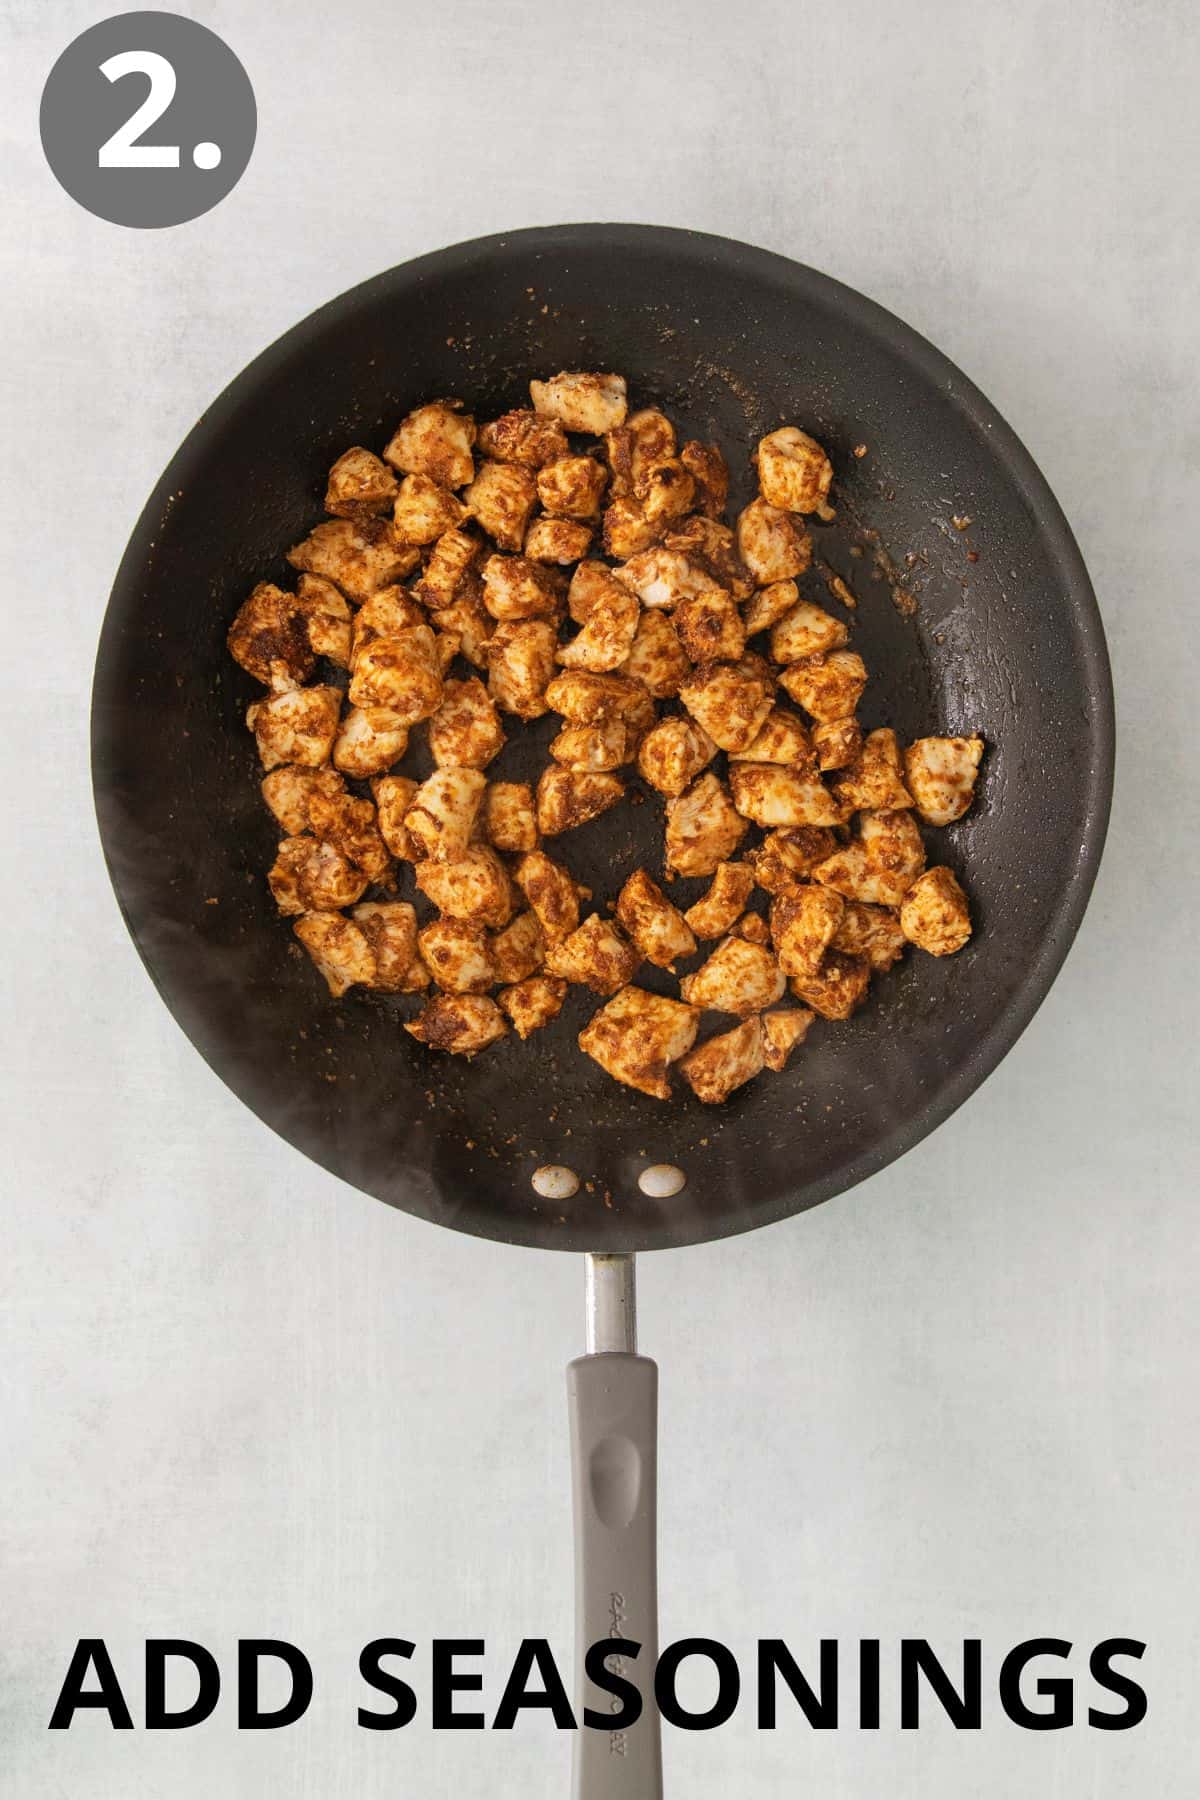 Cooked chicken in a skillet with seasoning added on top